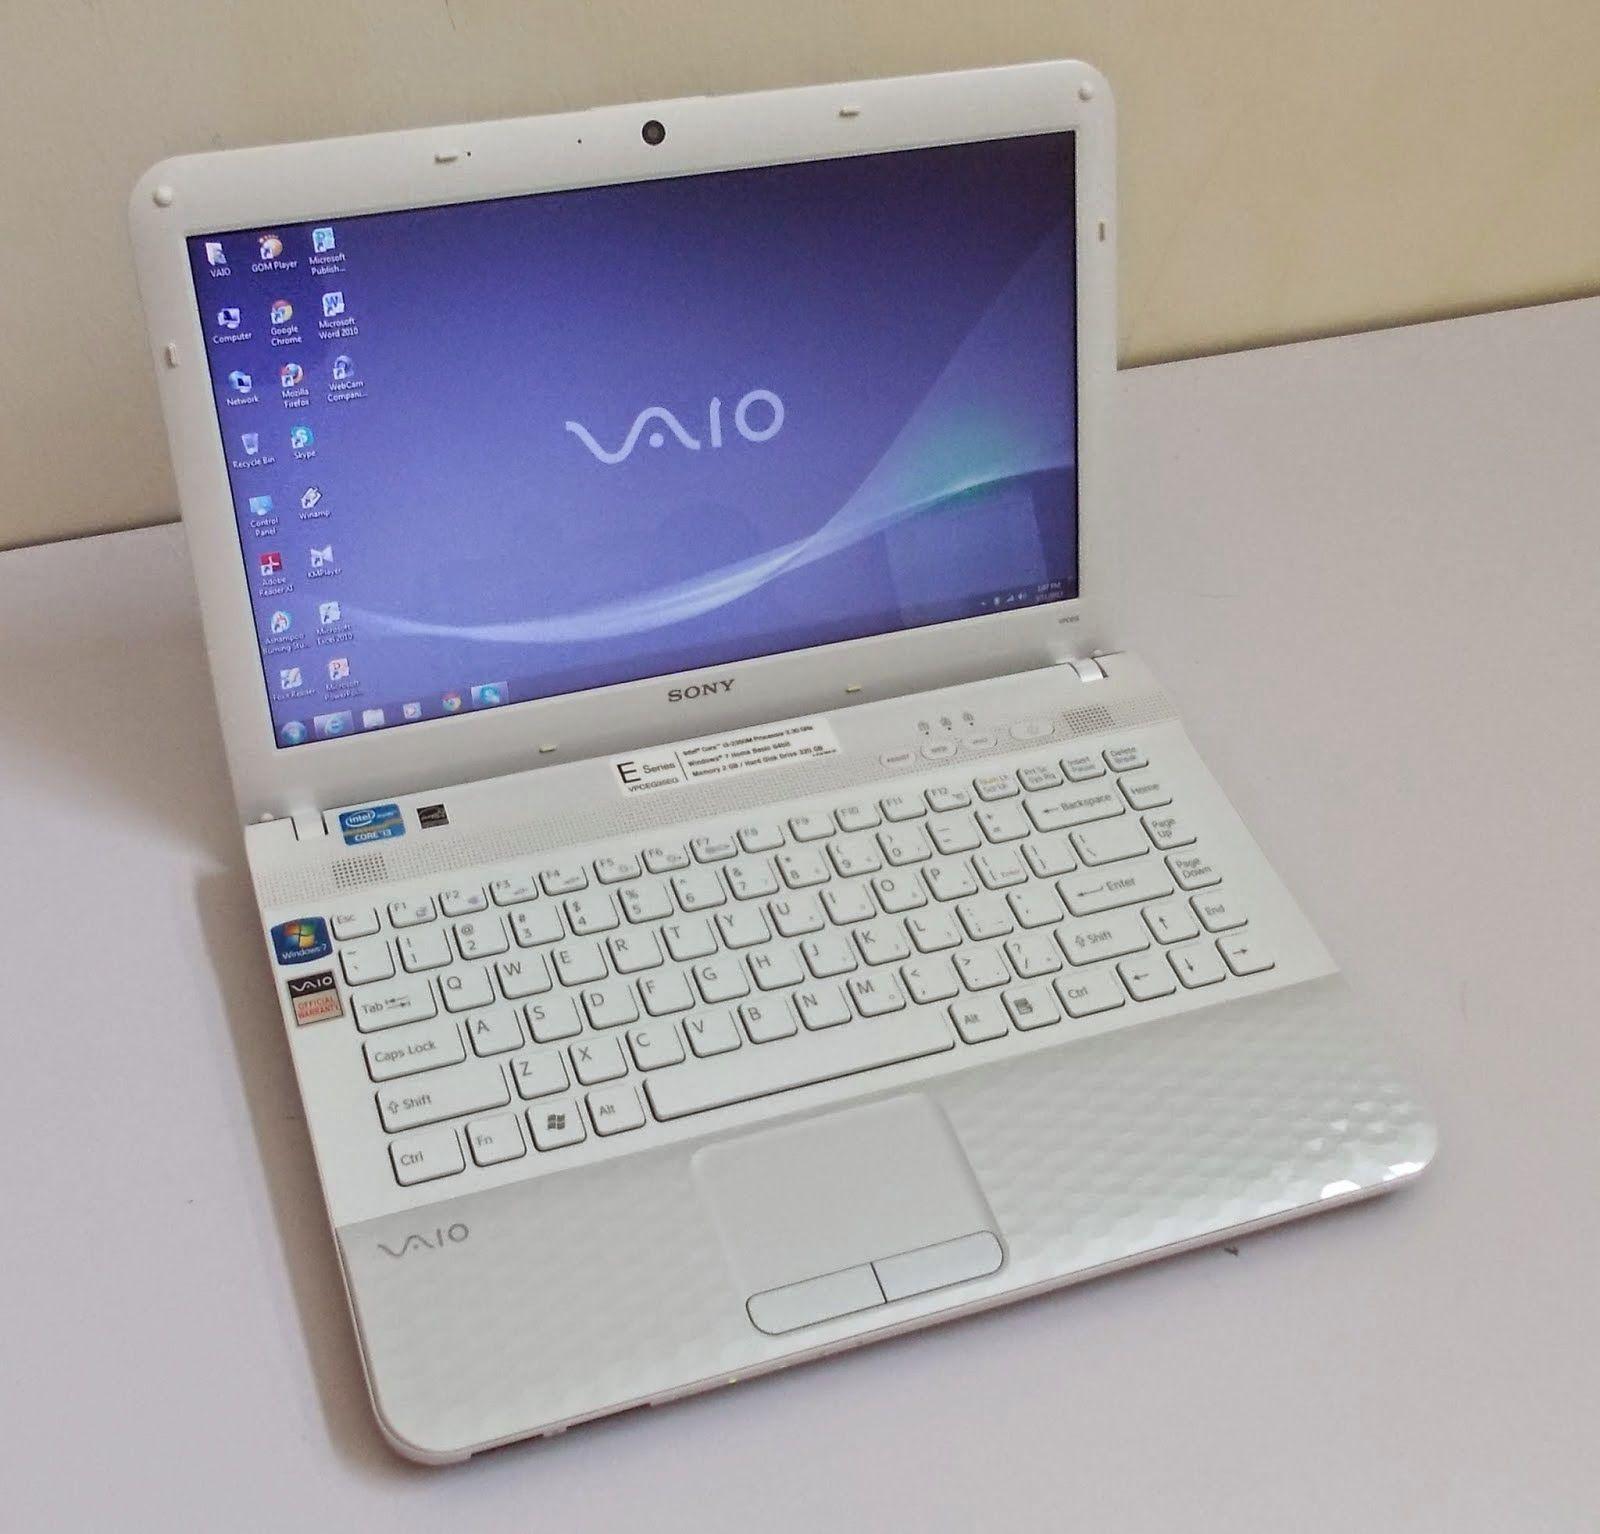 sony vaio white colour laptop wallpaper with information